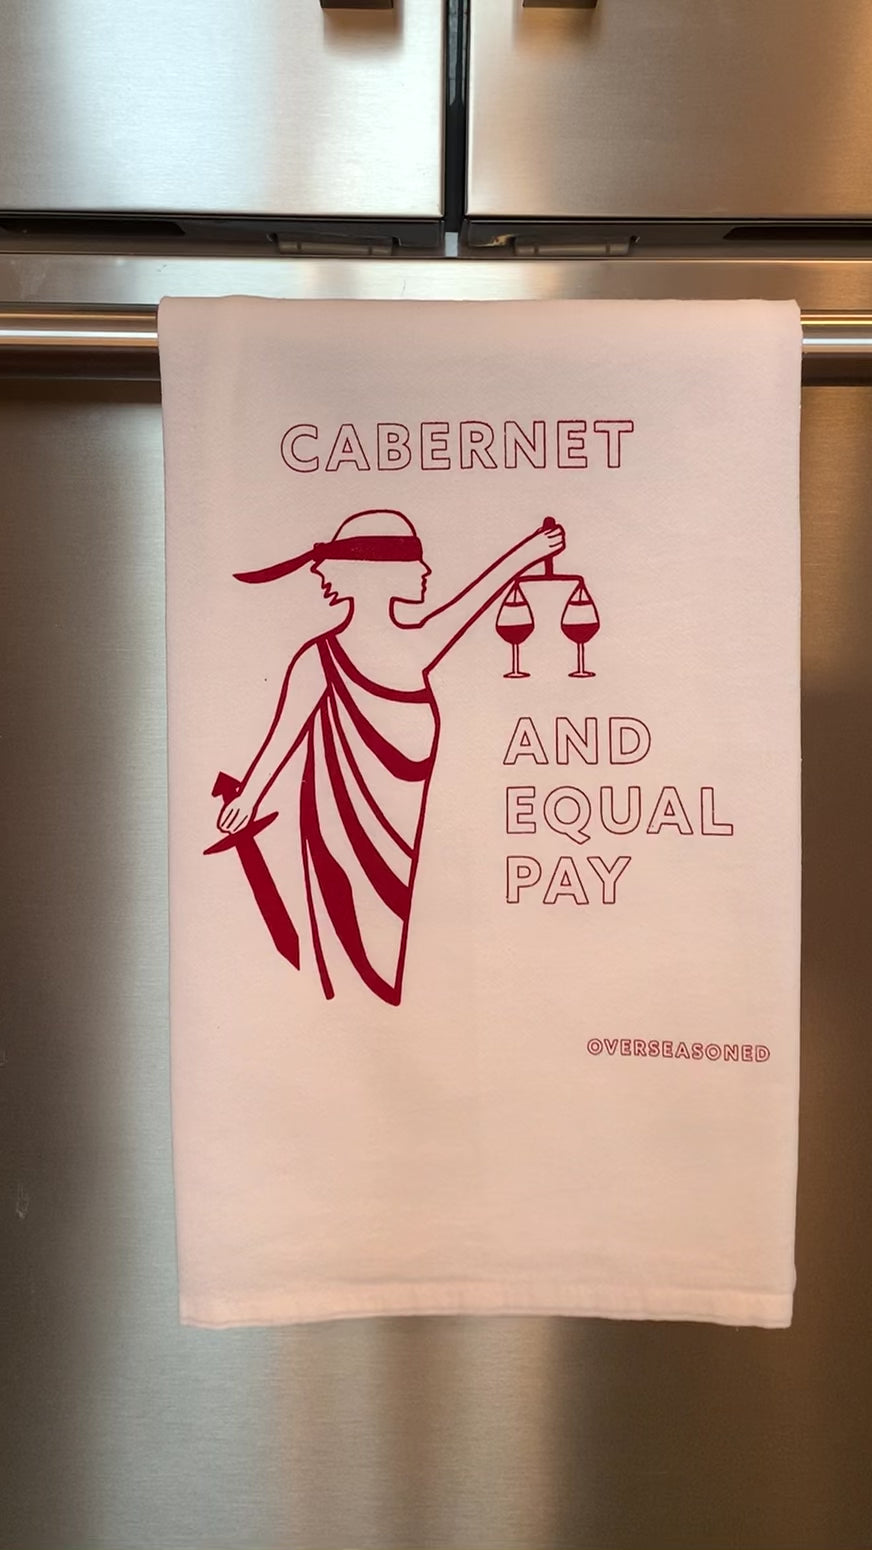 A white tea towel that reads "Cabernet and Equal Pay" in red lettering hangs from a bar